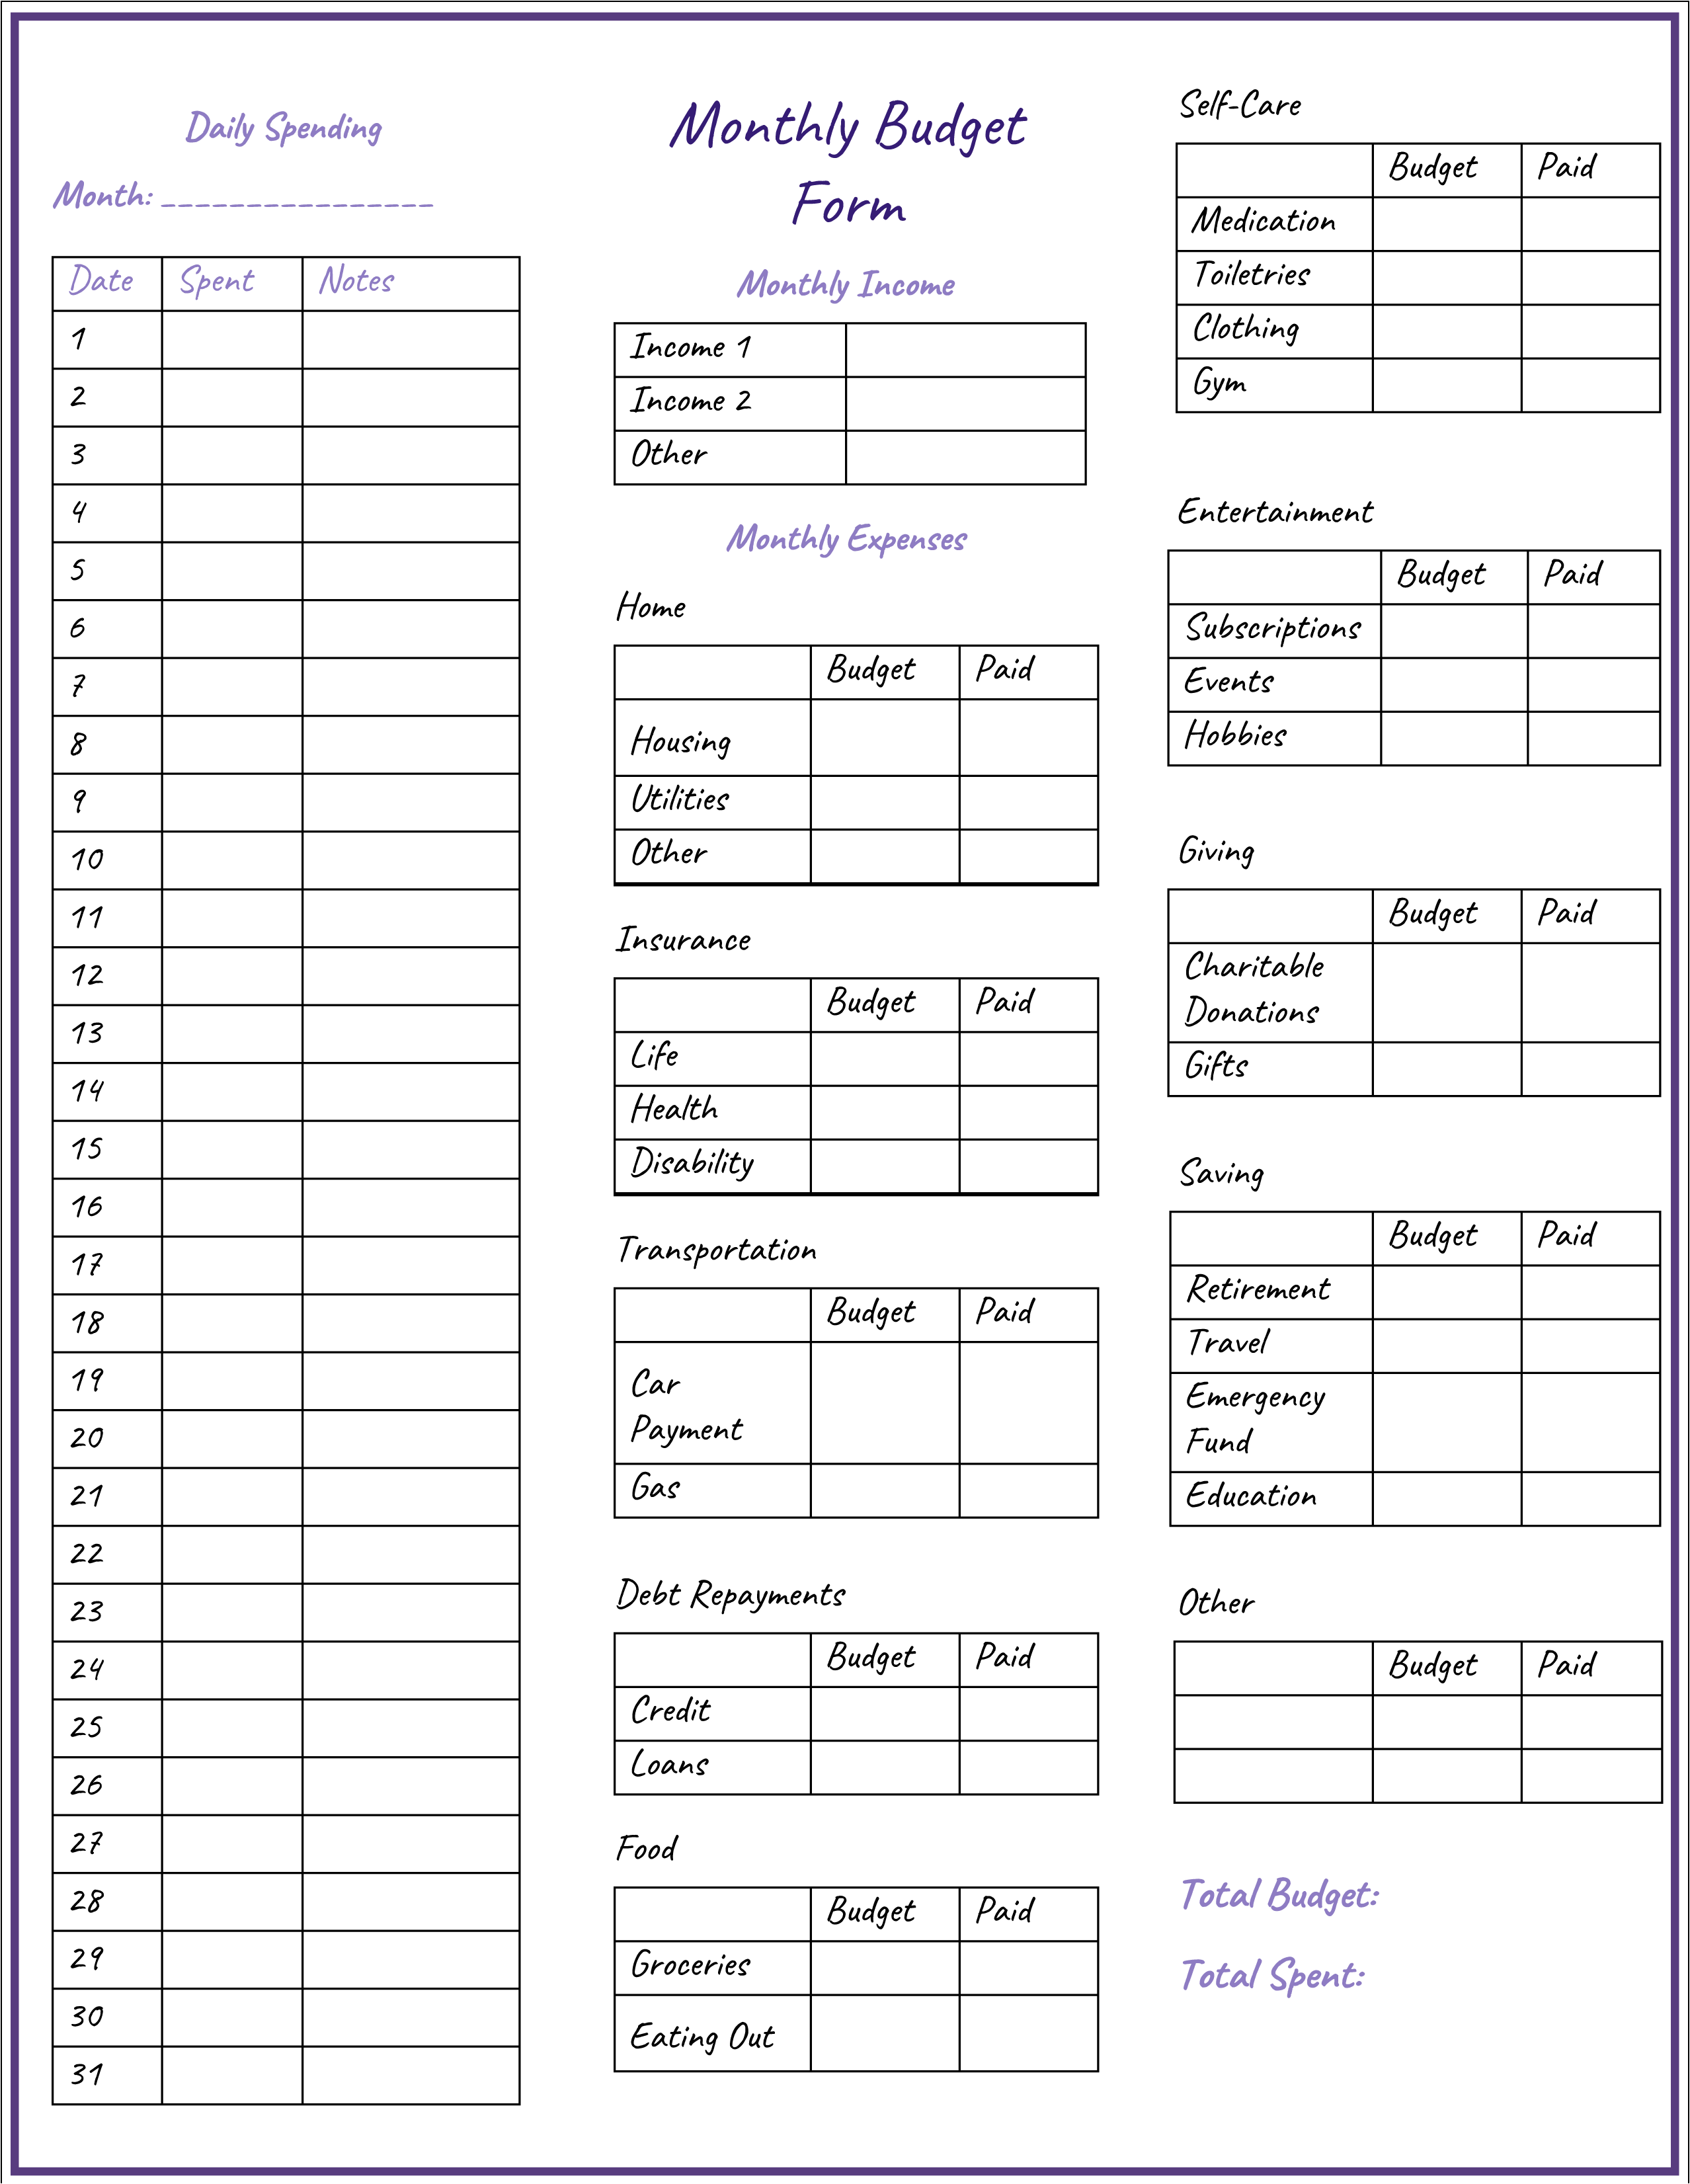 3 Monthly Budget Form Templates Printable In PDF Printerfriend ly